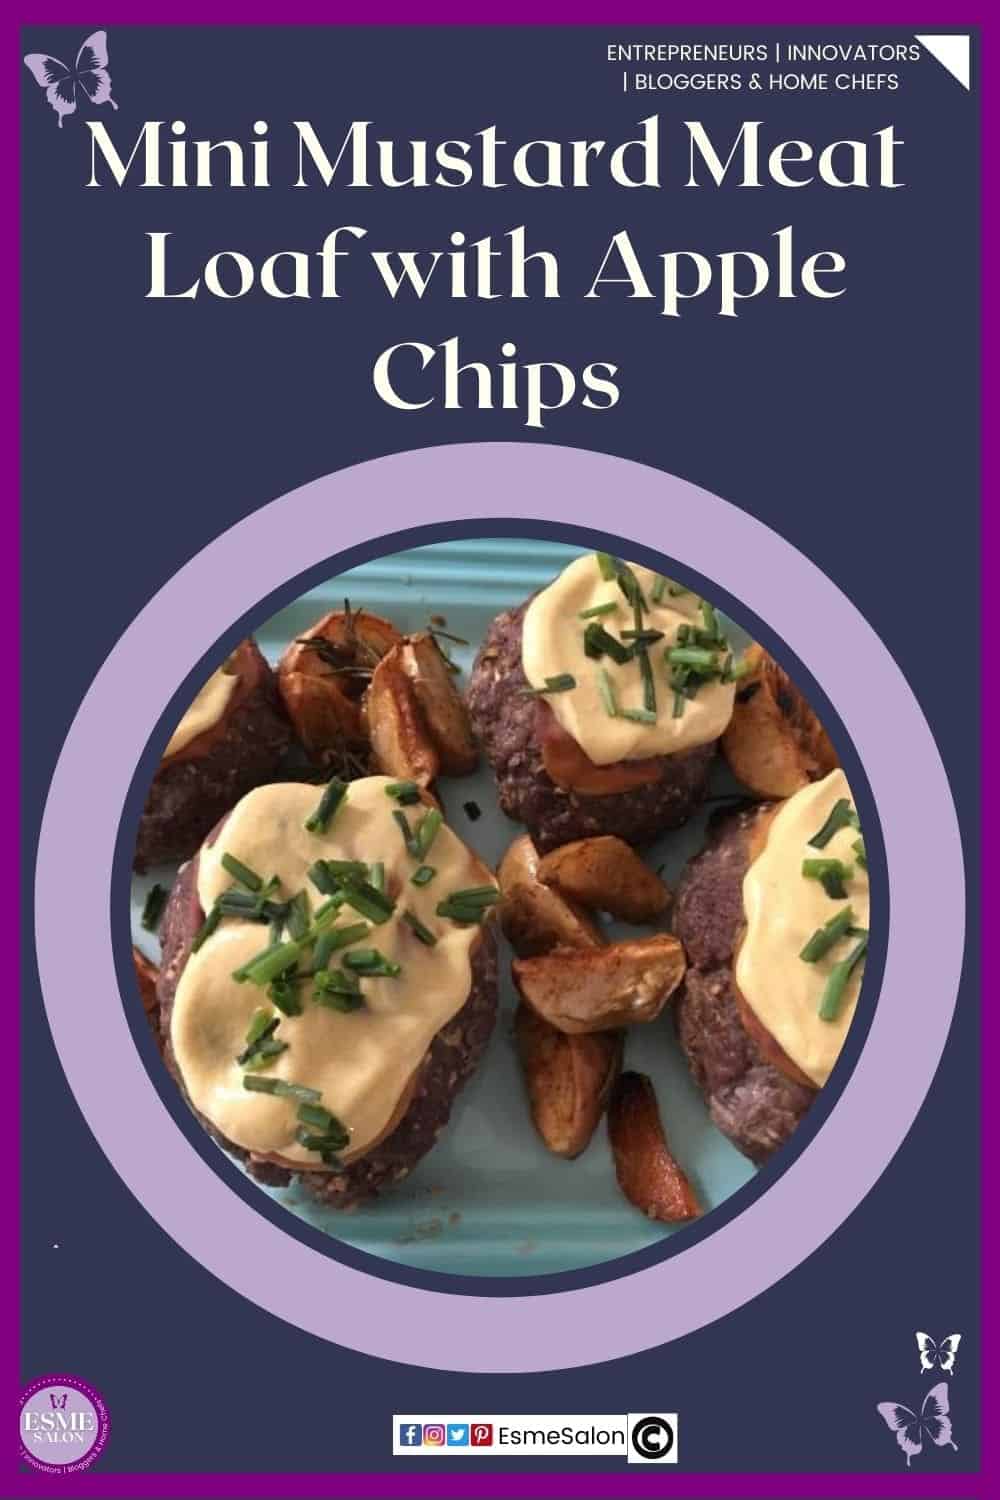 an image of a Mini Mustard Meat Loaf with Apple Chips placed on top of meat with mustard topping